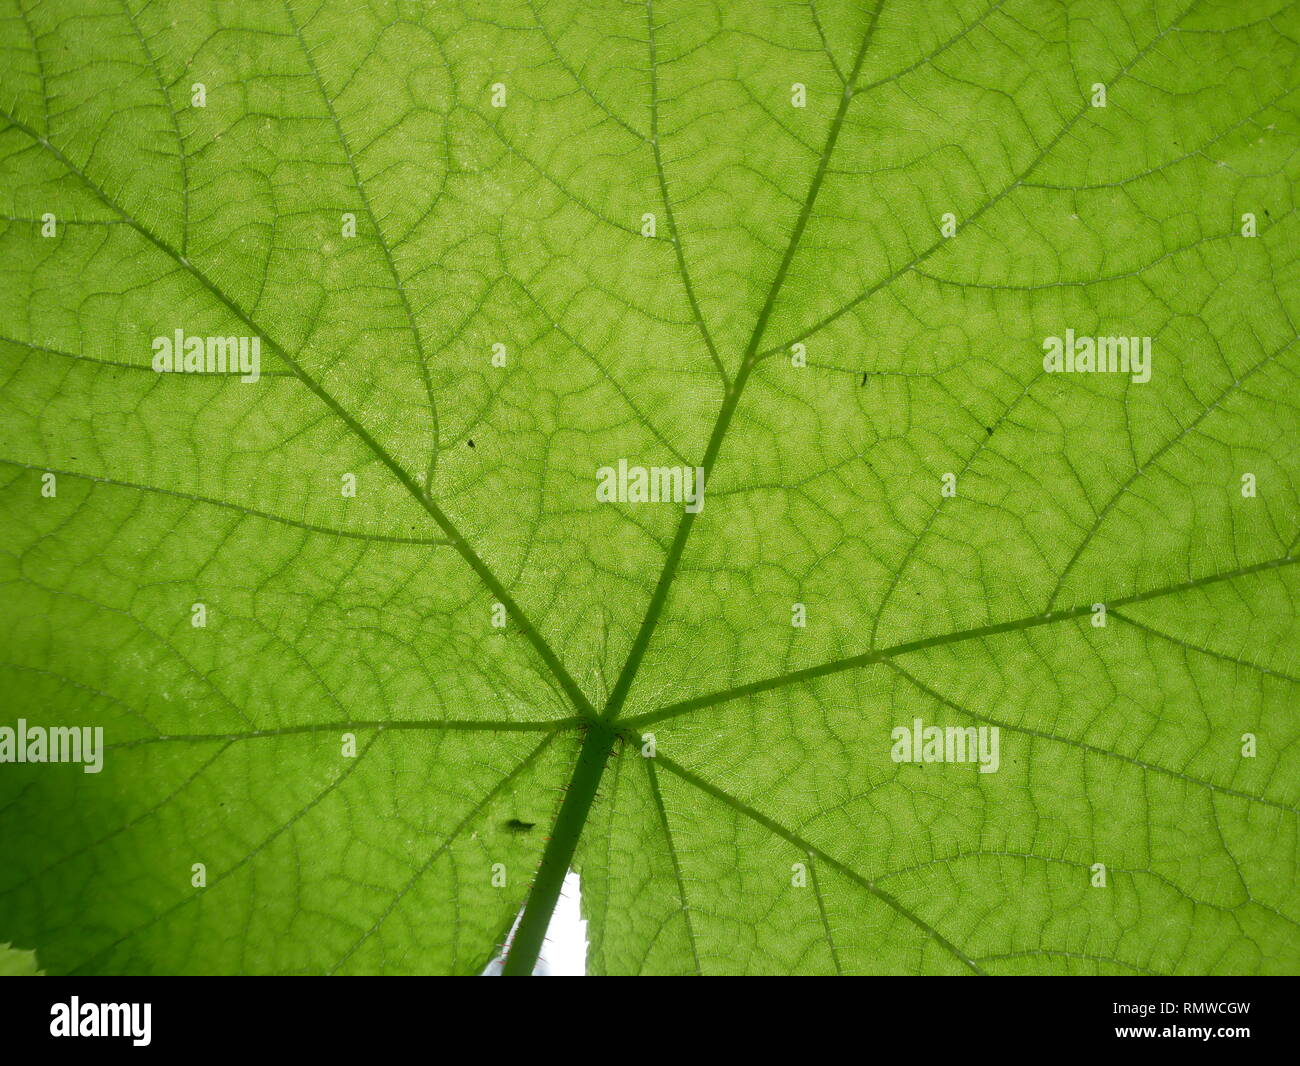 Close-up of a back lit green leaf showing texture and leaf veins in western California Stock Photo